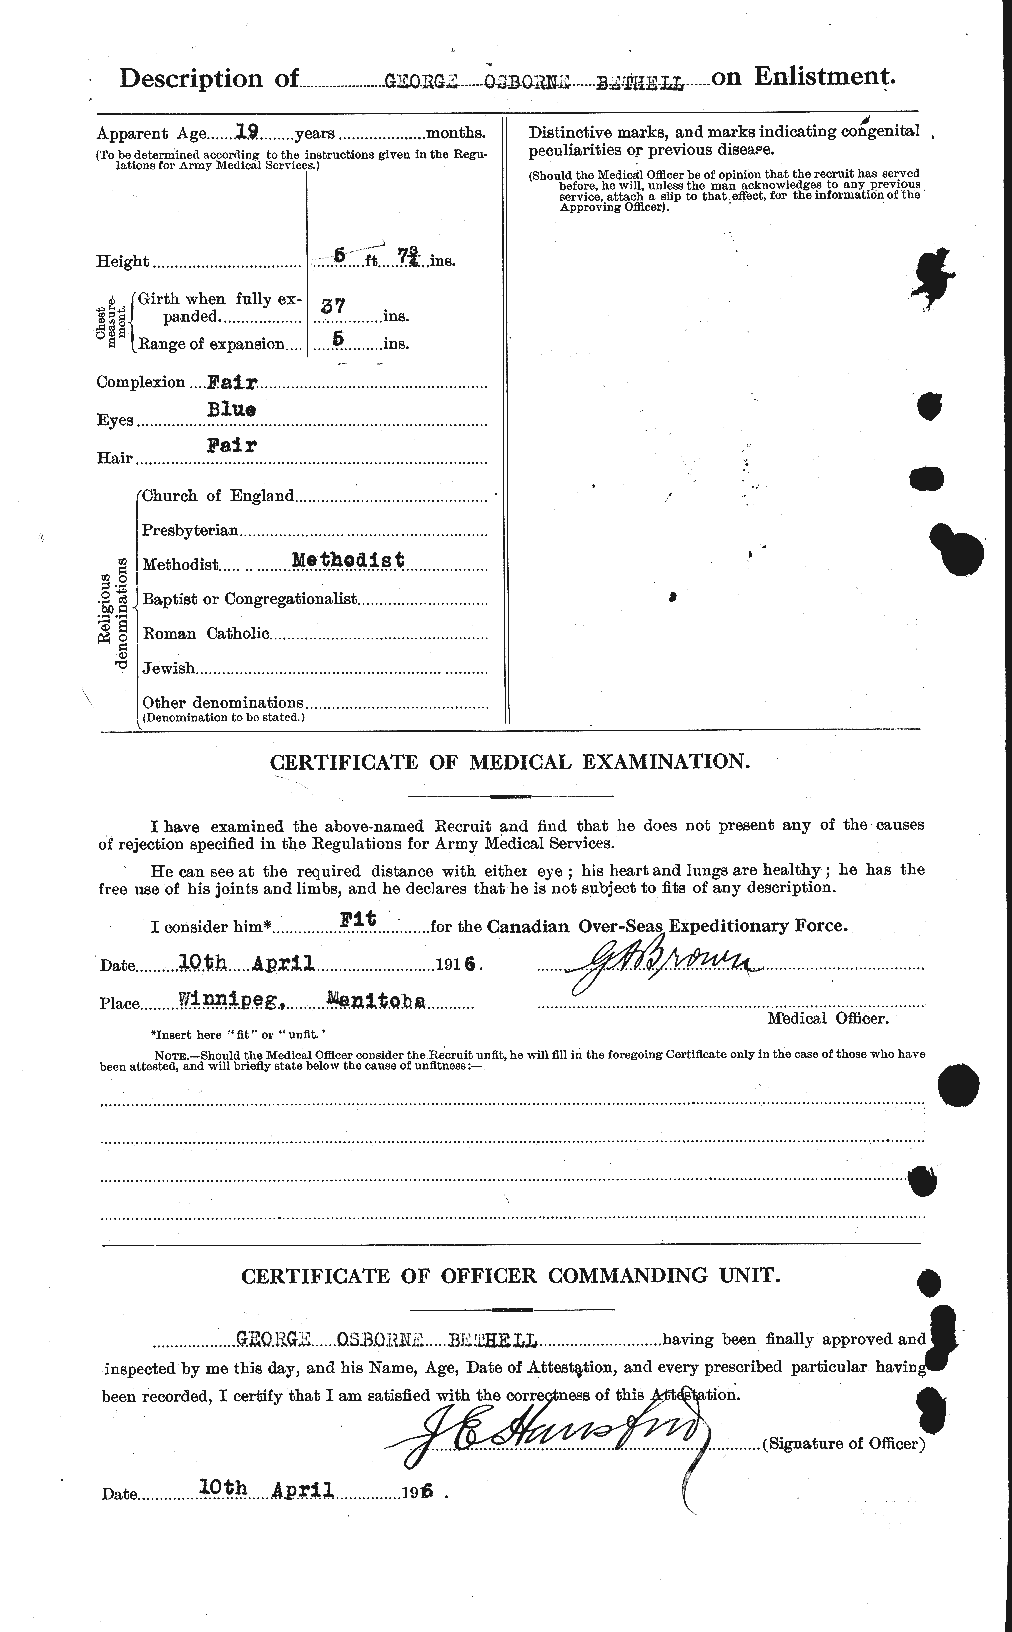 Personnel Records of the First World War - CEF 236987b